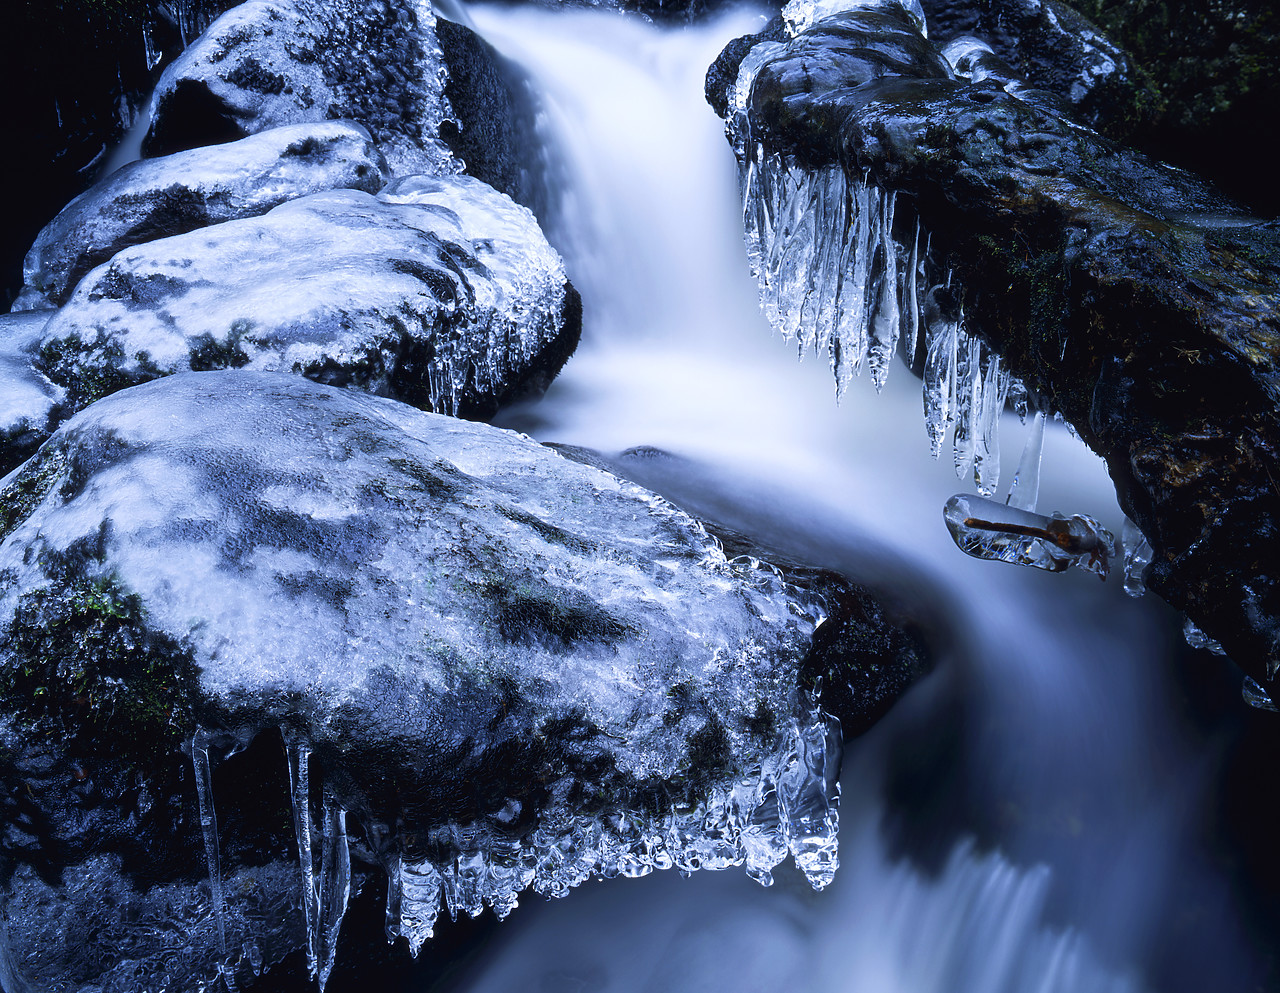 #030017-1 - Icy Waterfall, Lake District National Park, Cumbria, England